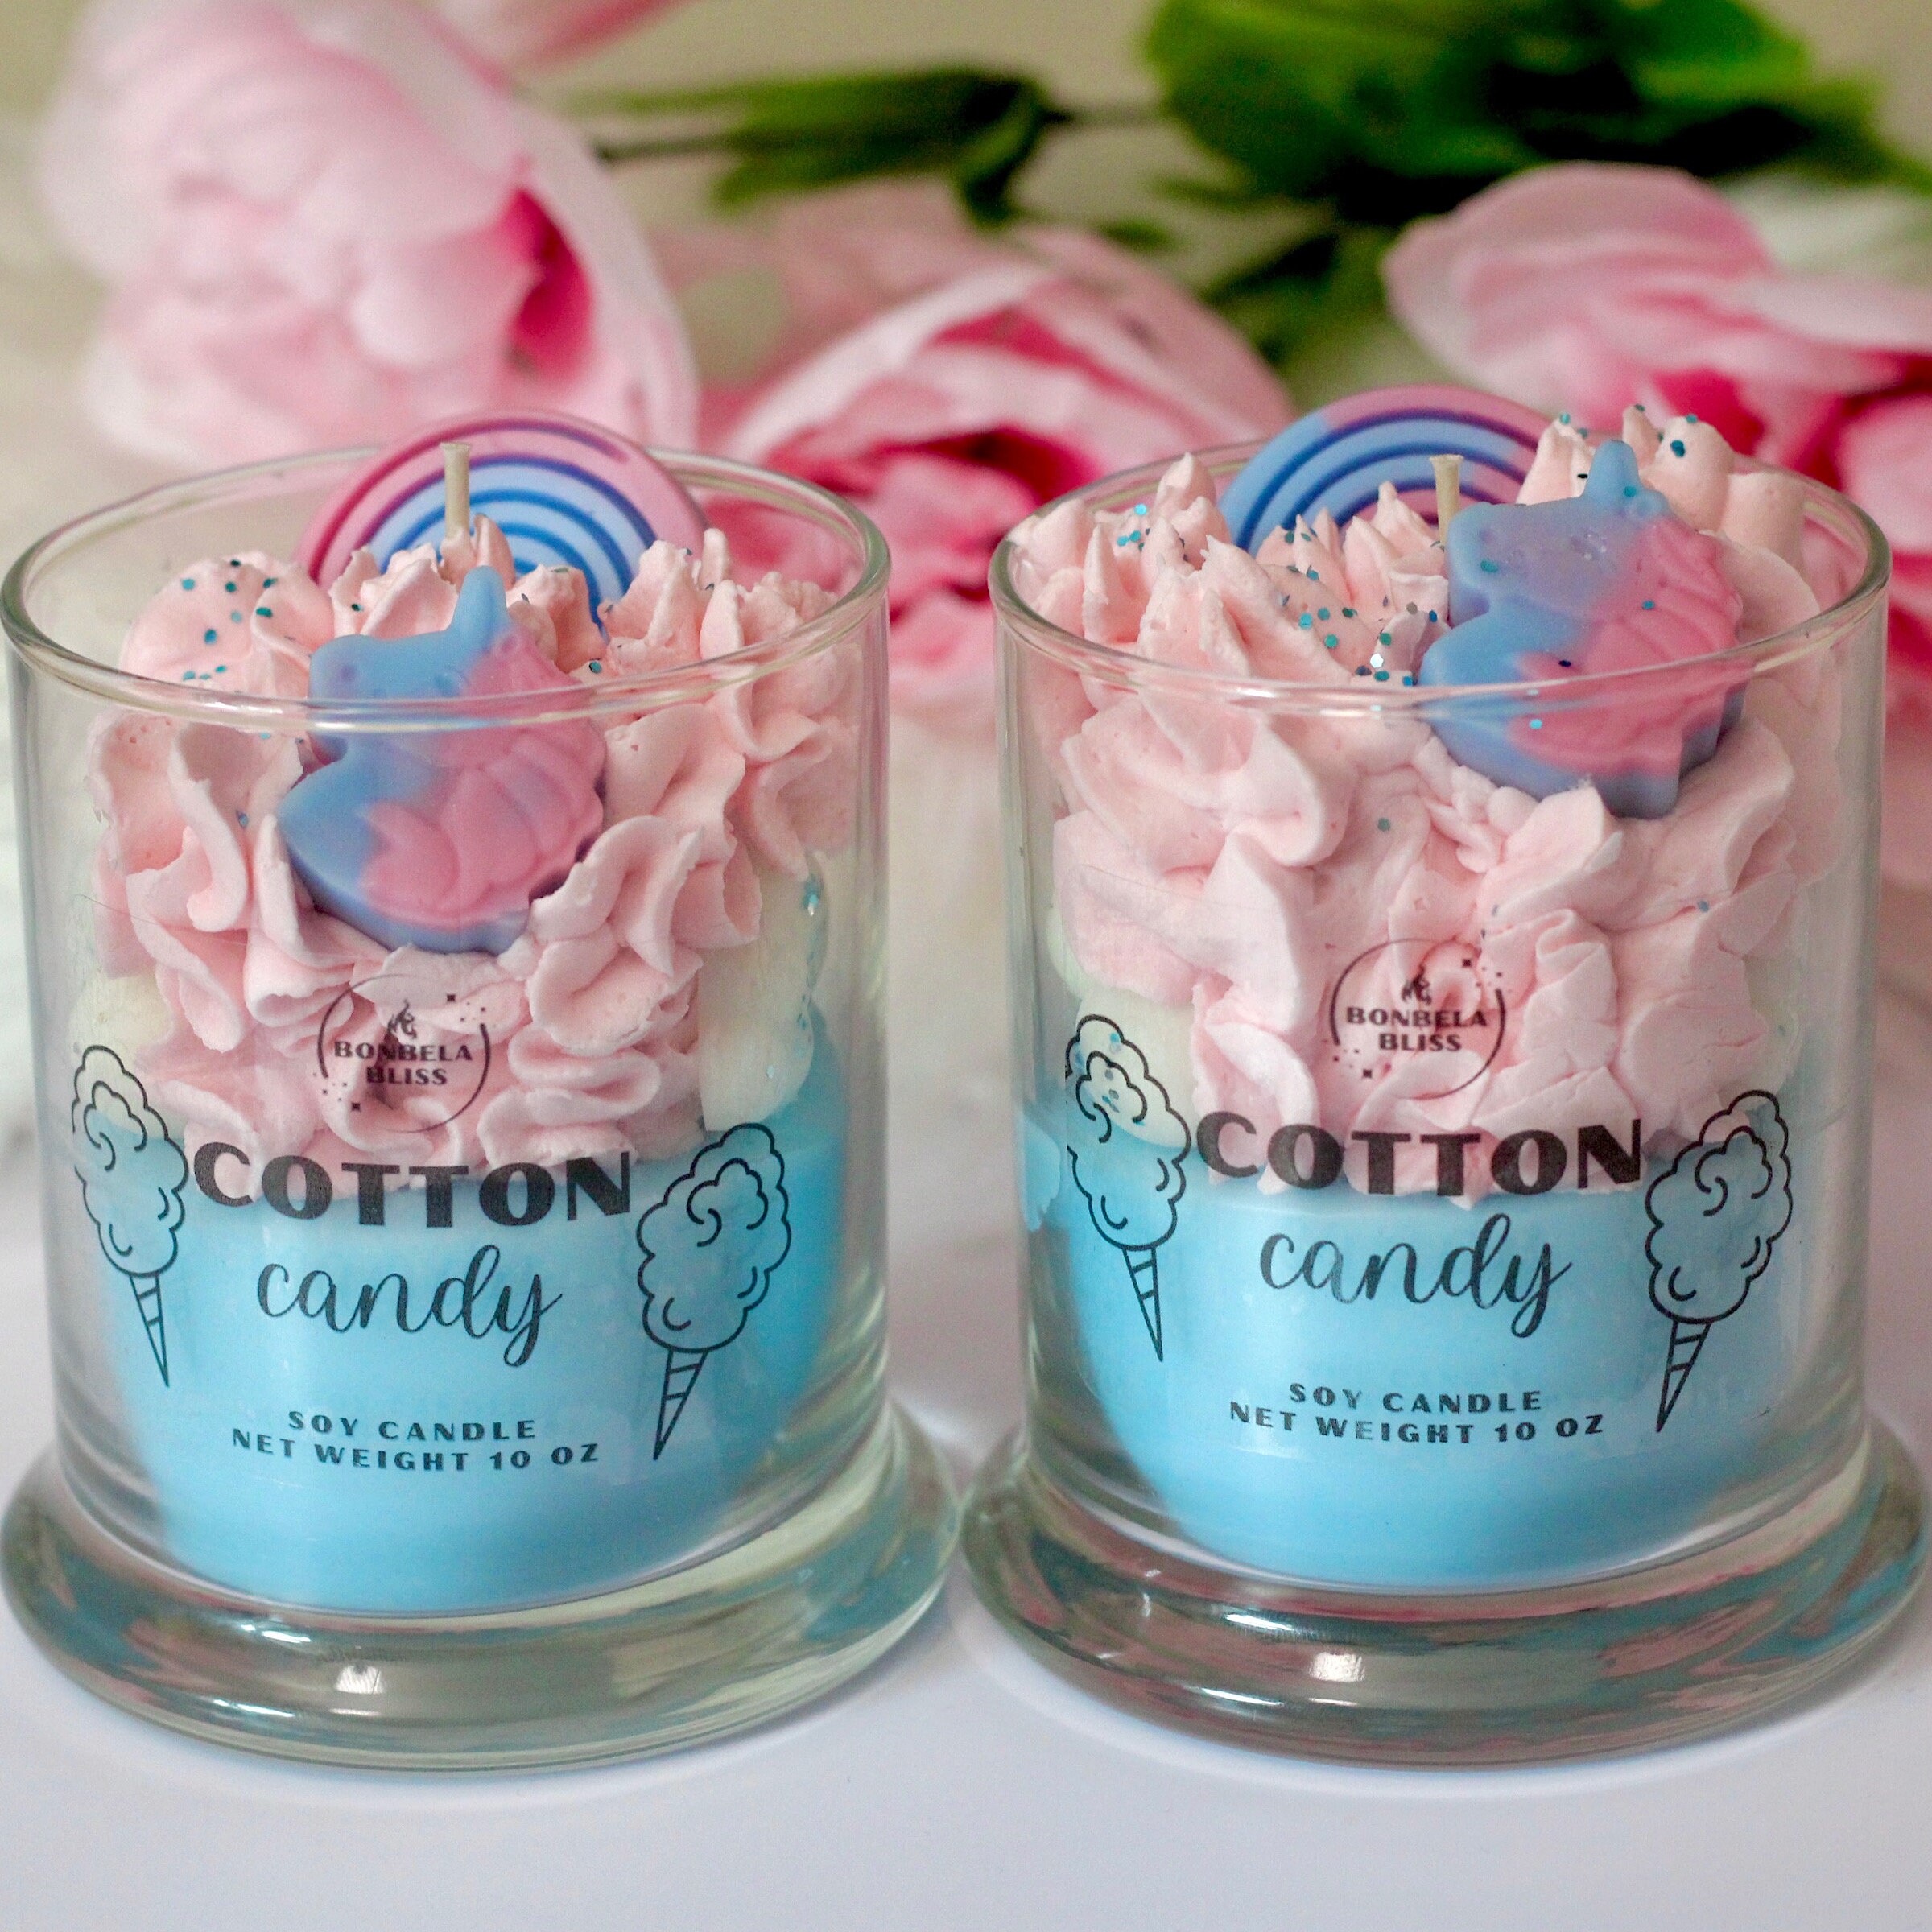 Cotton Candy Candle / Cotton Candy / Soy Candle / Soy Wax Candle / Wood  Wick Candle / Hand Poured Candle